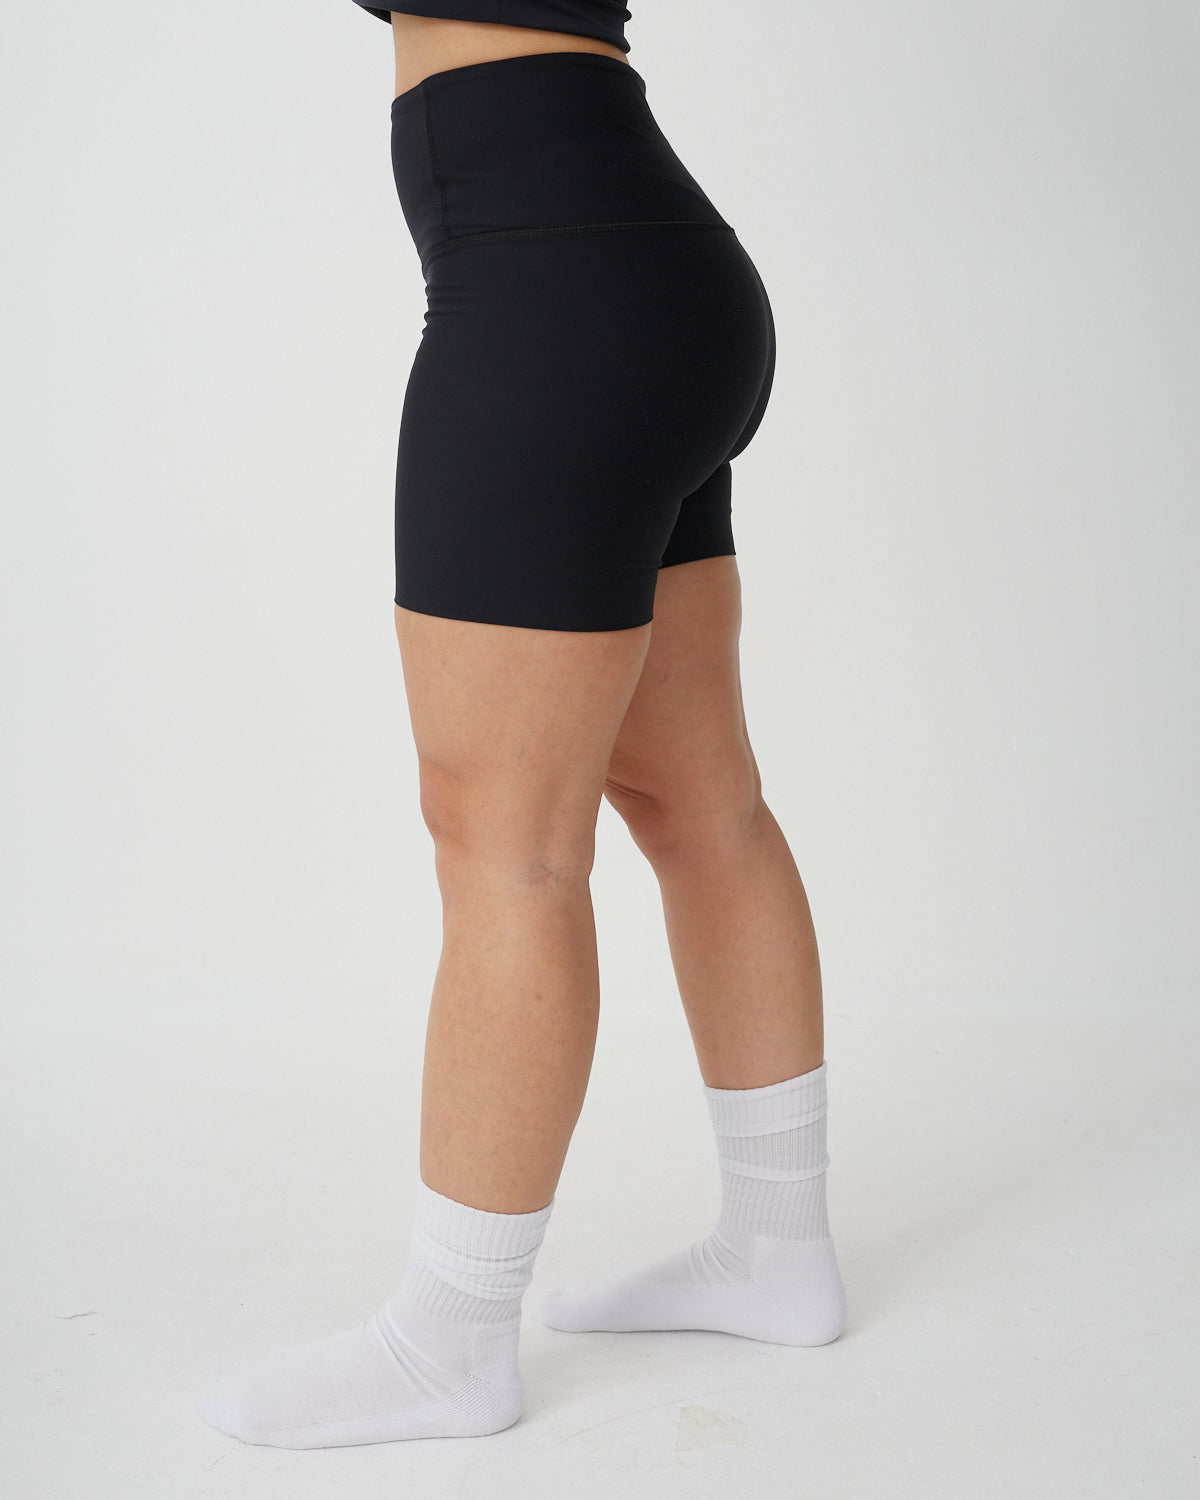 Compression Seamless Shorts in Black